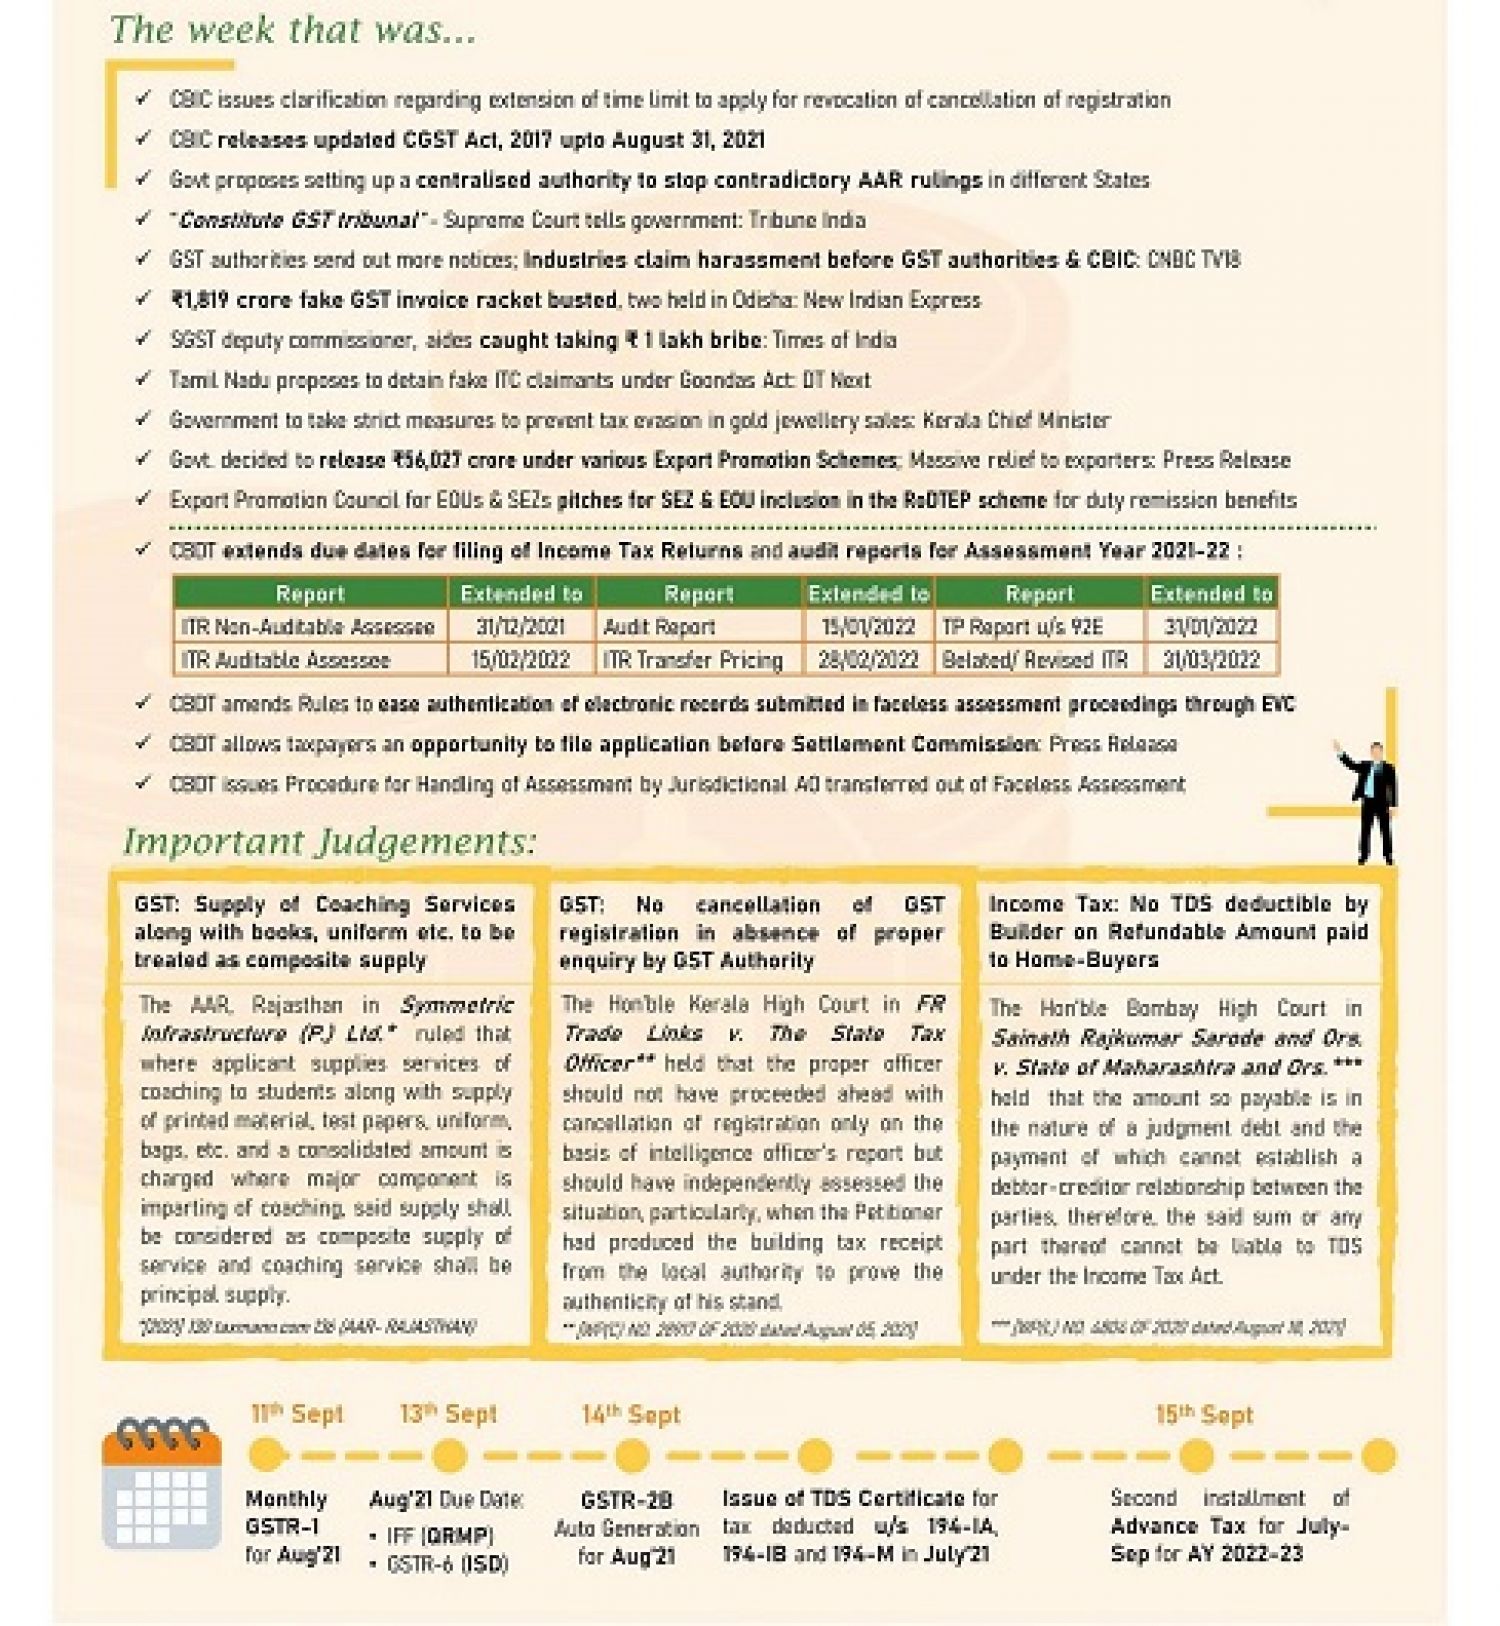 GST UPDATES FOR THE PERIOD OF Aug 2021 